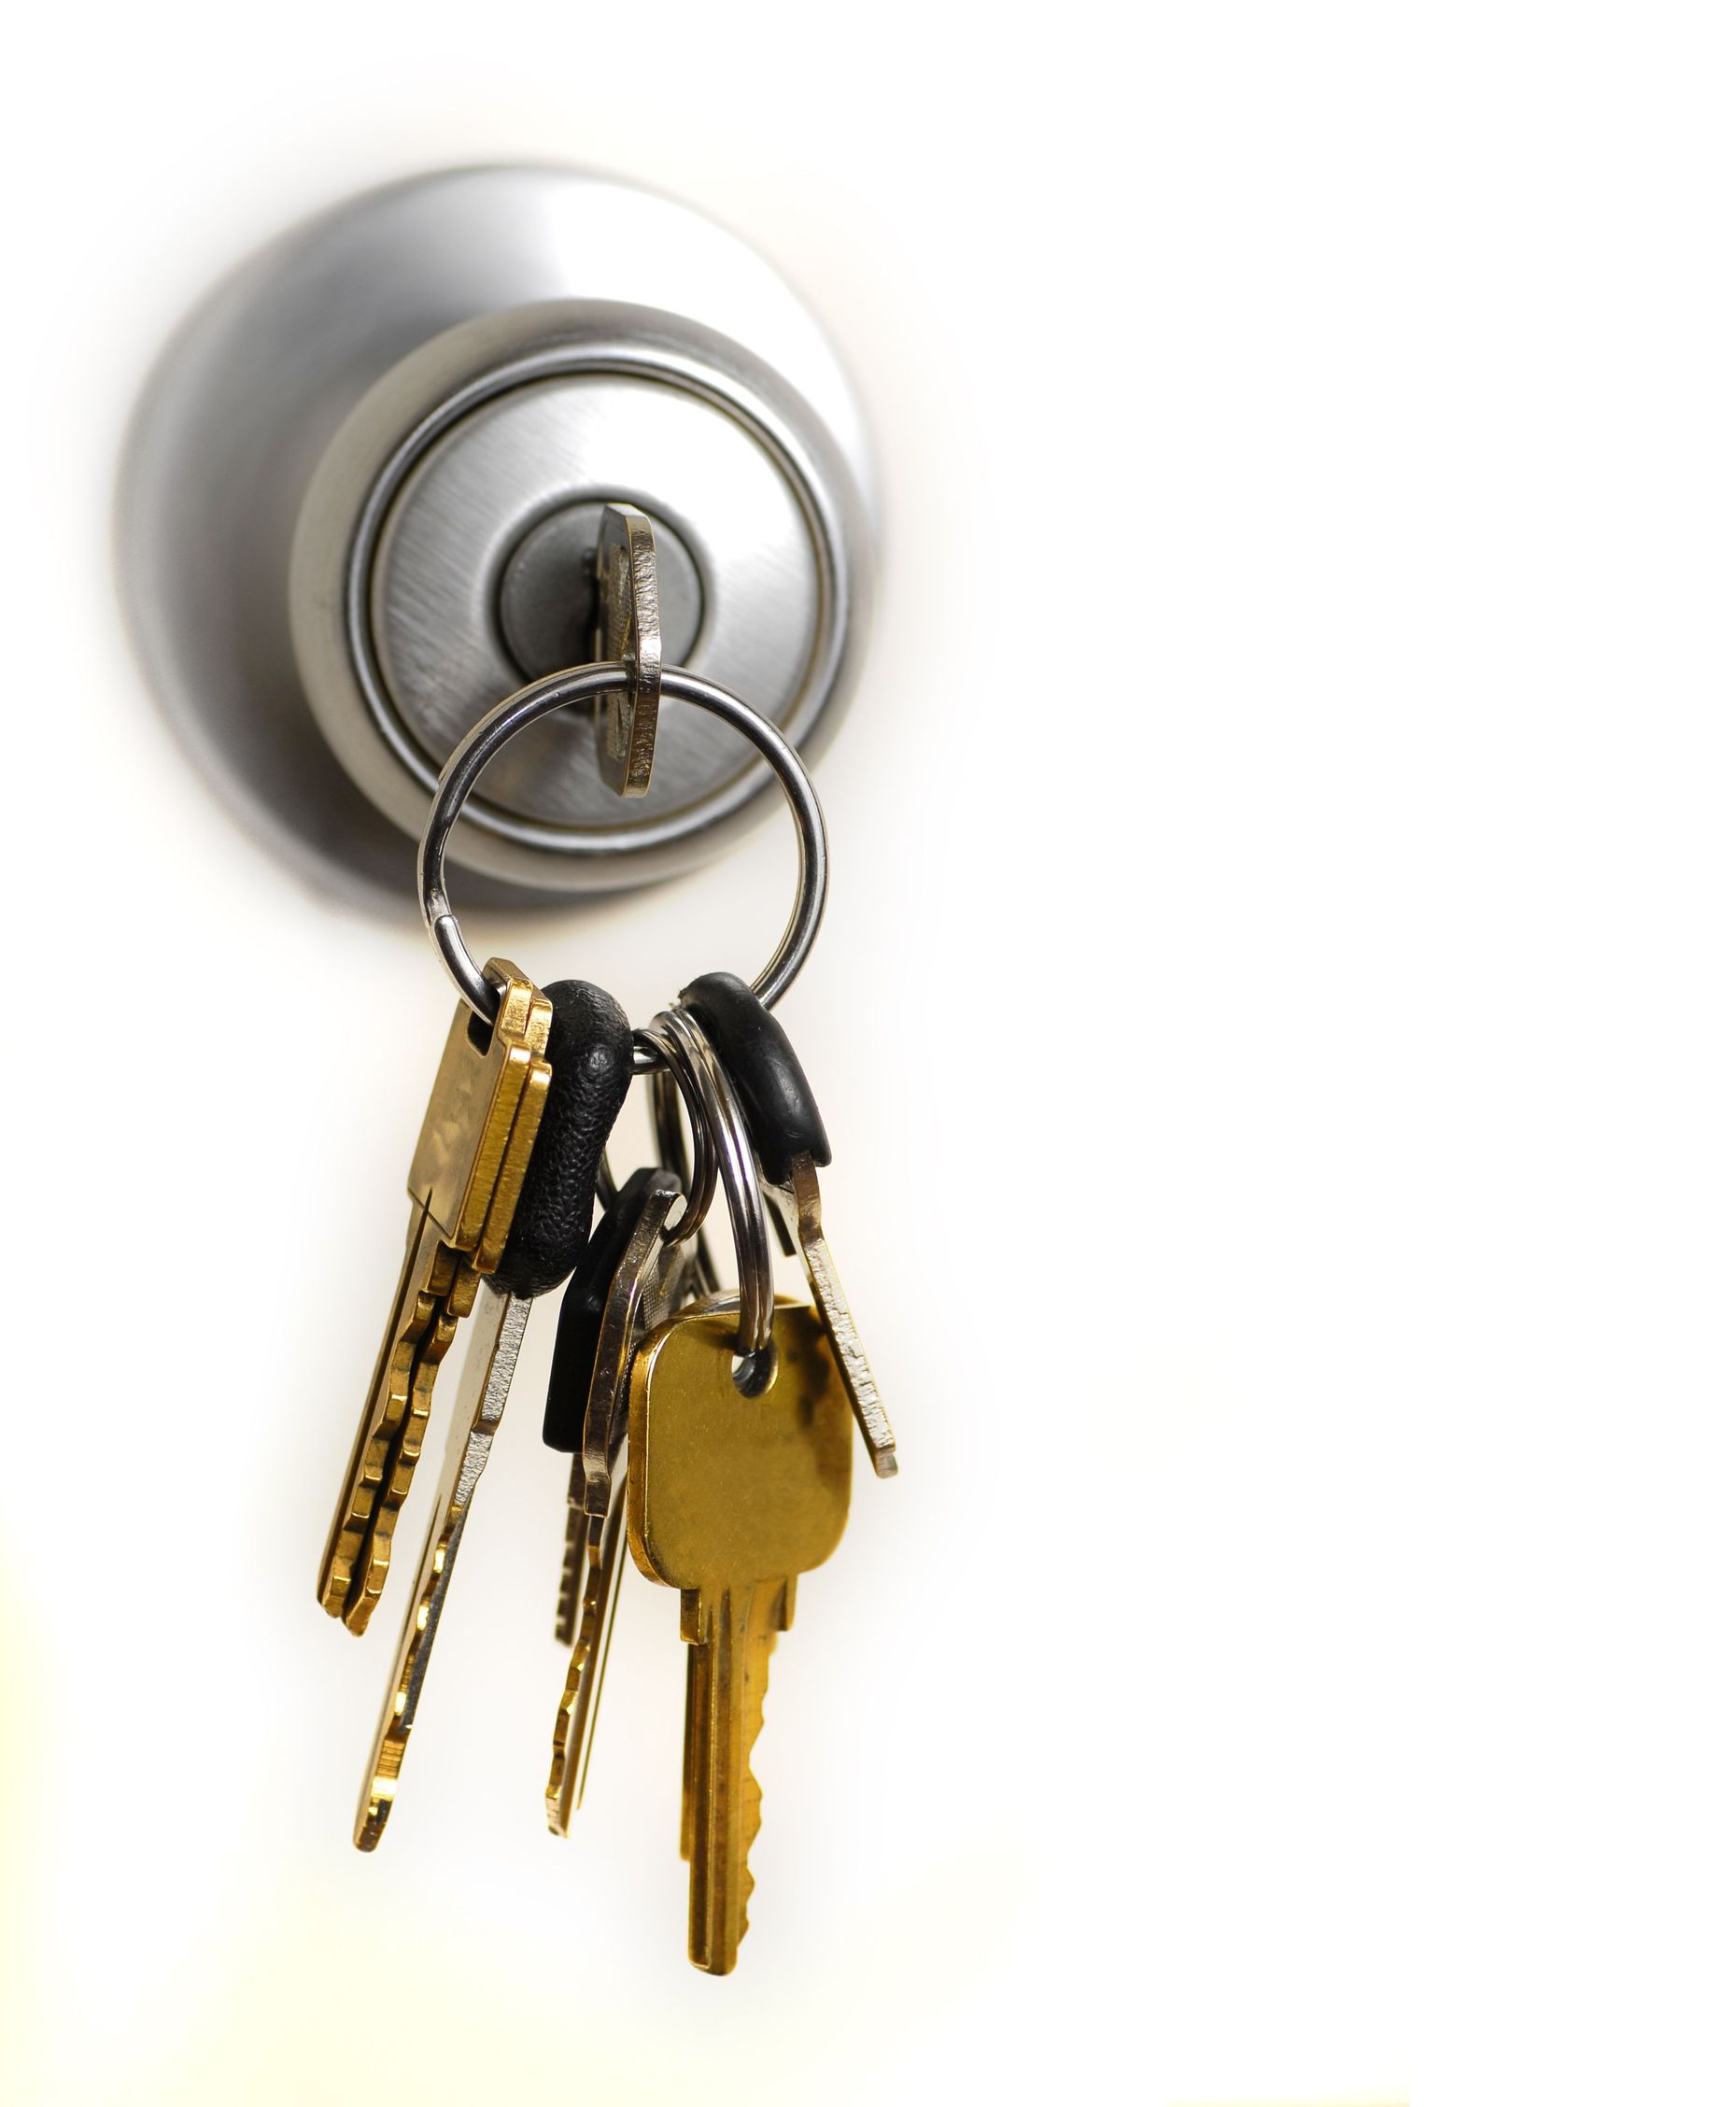 It’s a Good Idea to Know the Number of a 24 Hour Locksmith Service in Jacksonville FL